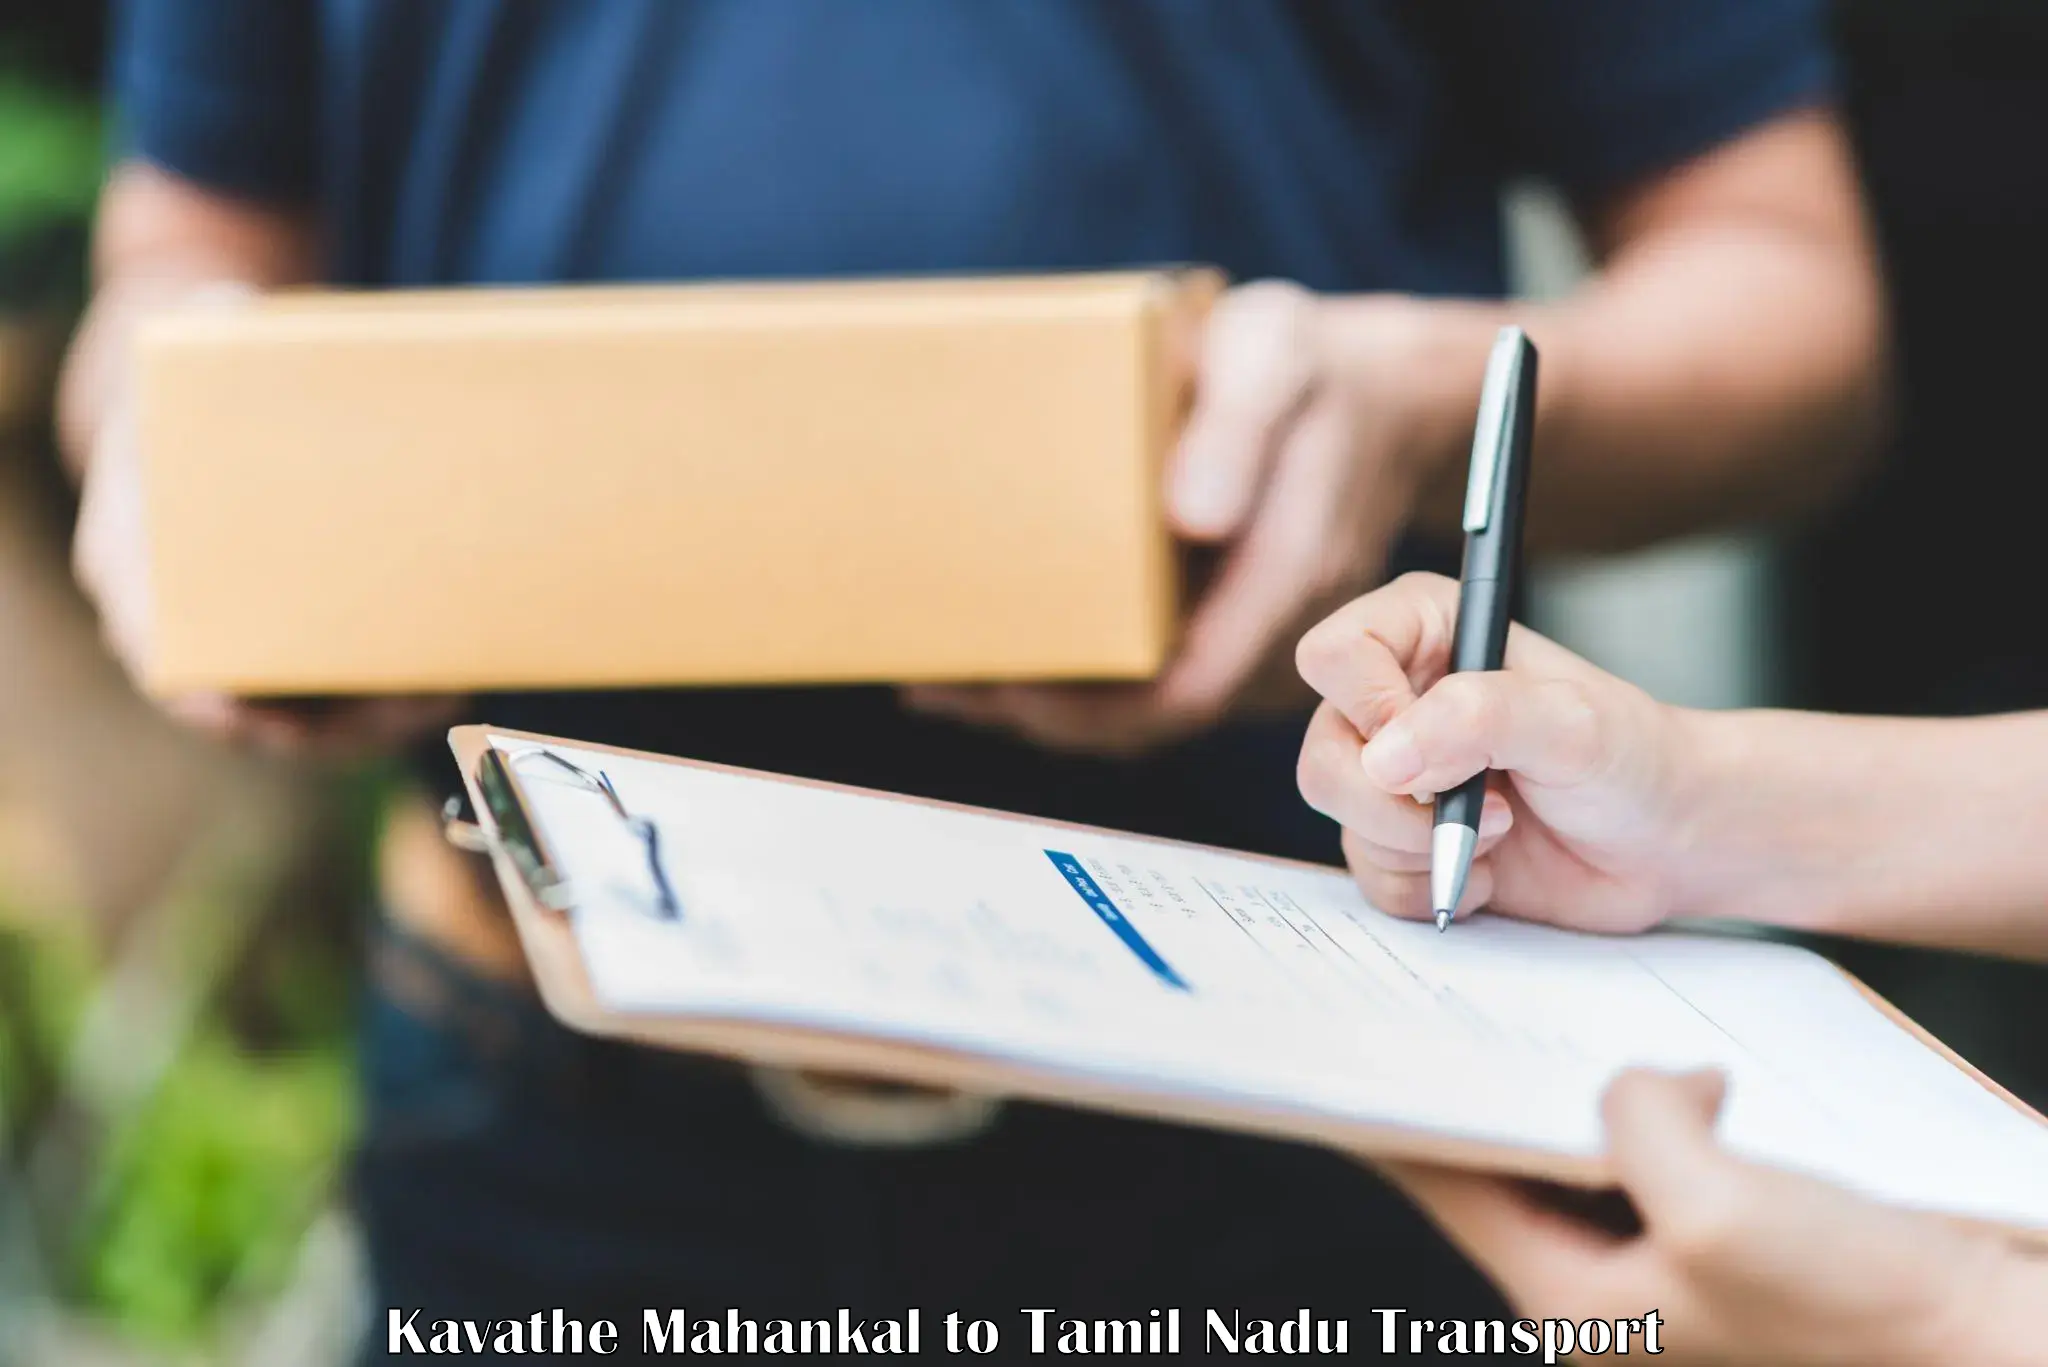 Furniture transport service Kavathe Mahankal to SRM Institute of Science and Technology Chennai